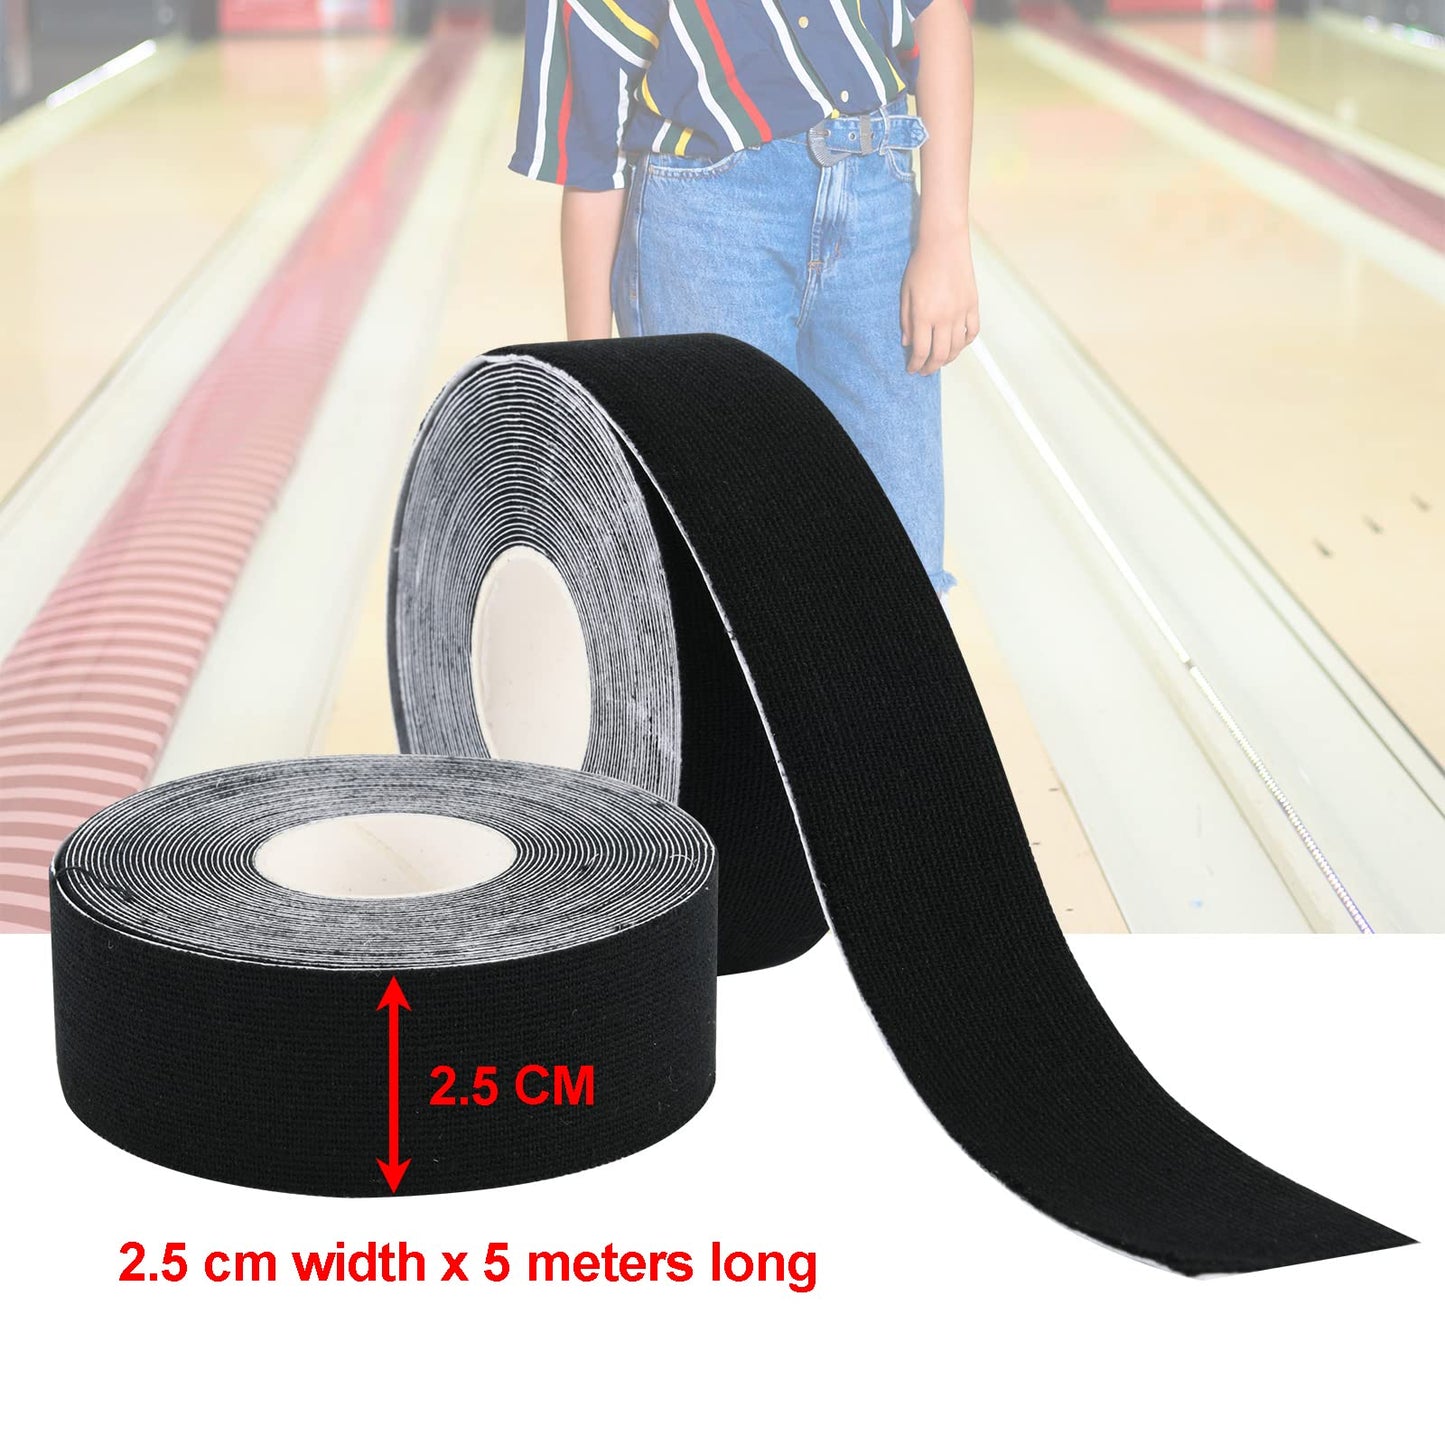 Cosmos Set of 2 Rolls Bowling Finger Tape Thumb Tape Elastic Bowling Ball Thumb Tape Protective Bowling Accessories for Bowler Sport Exercise Workout, Each Roll 2.5 cm x 5m